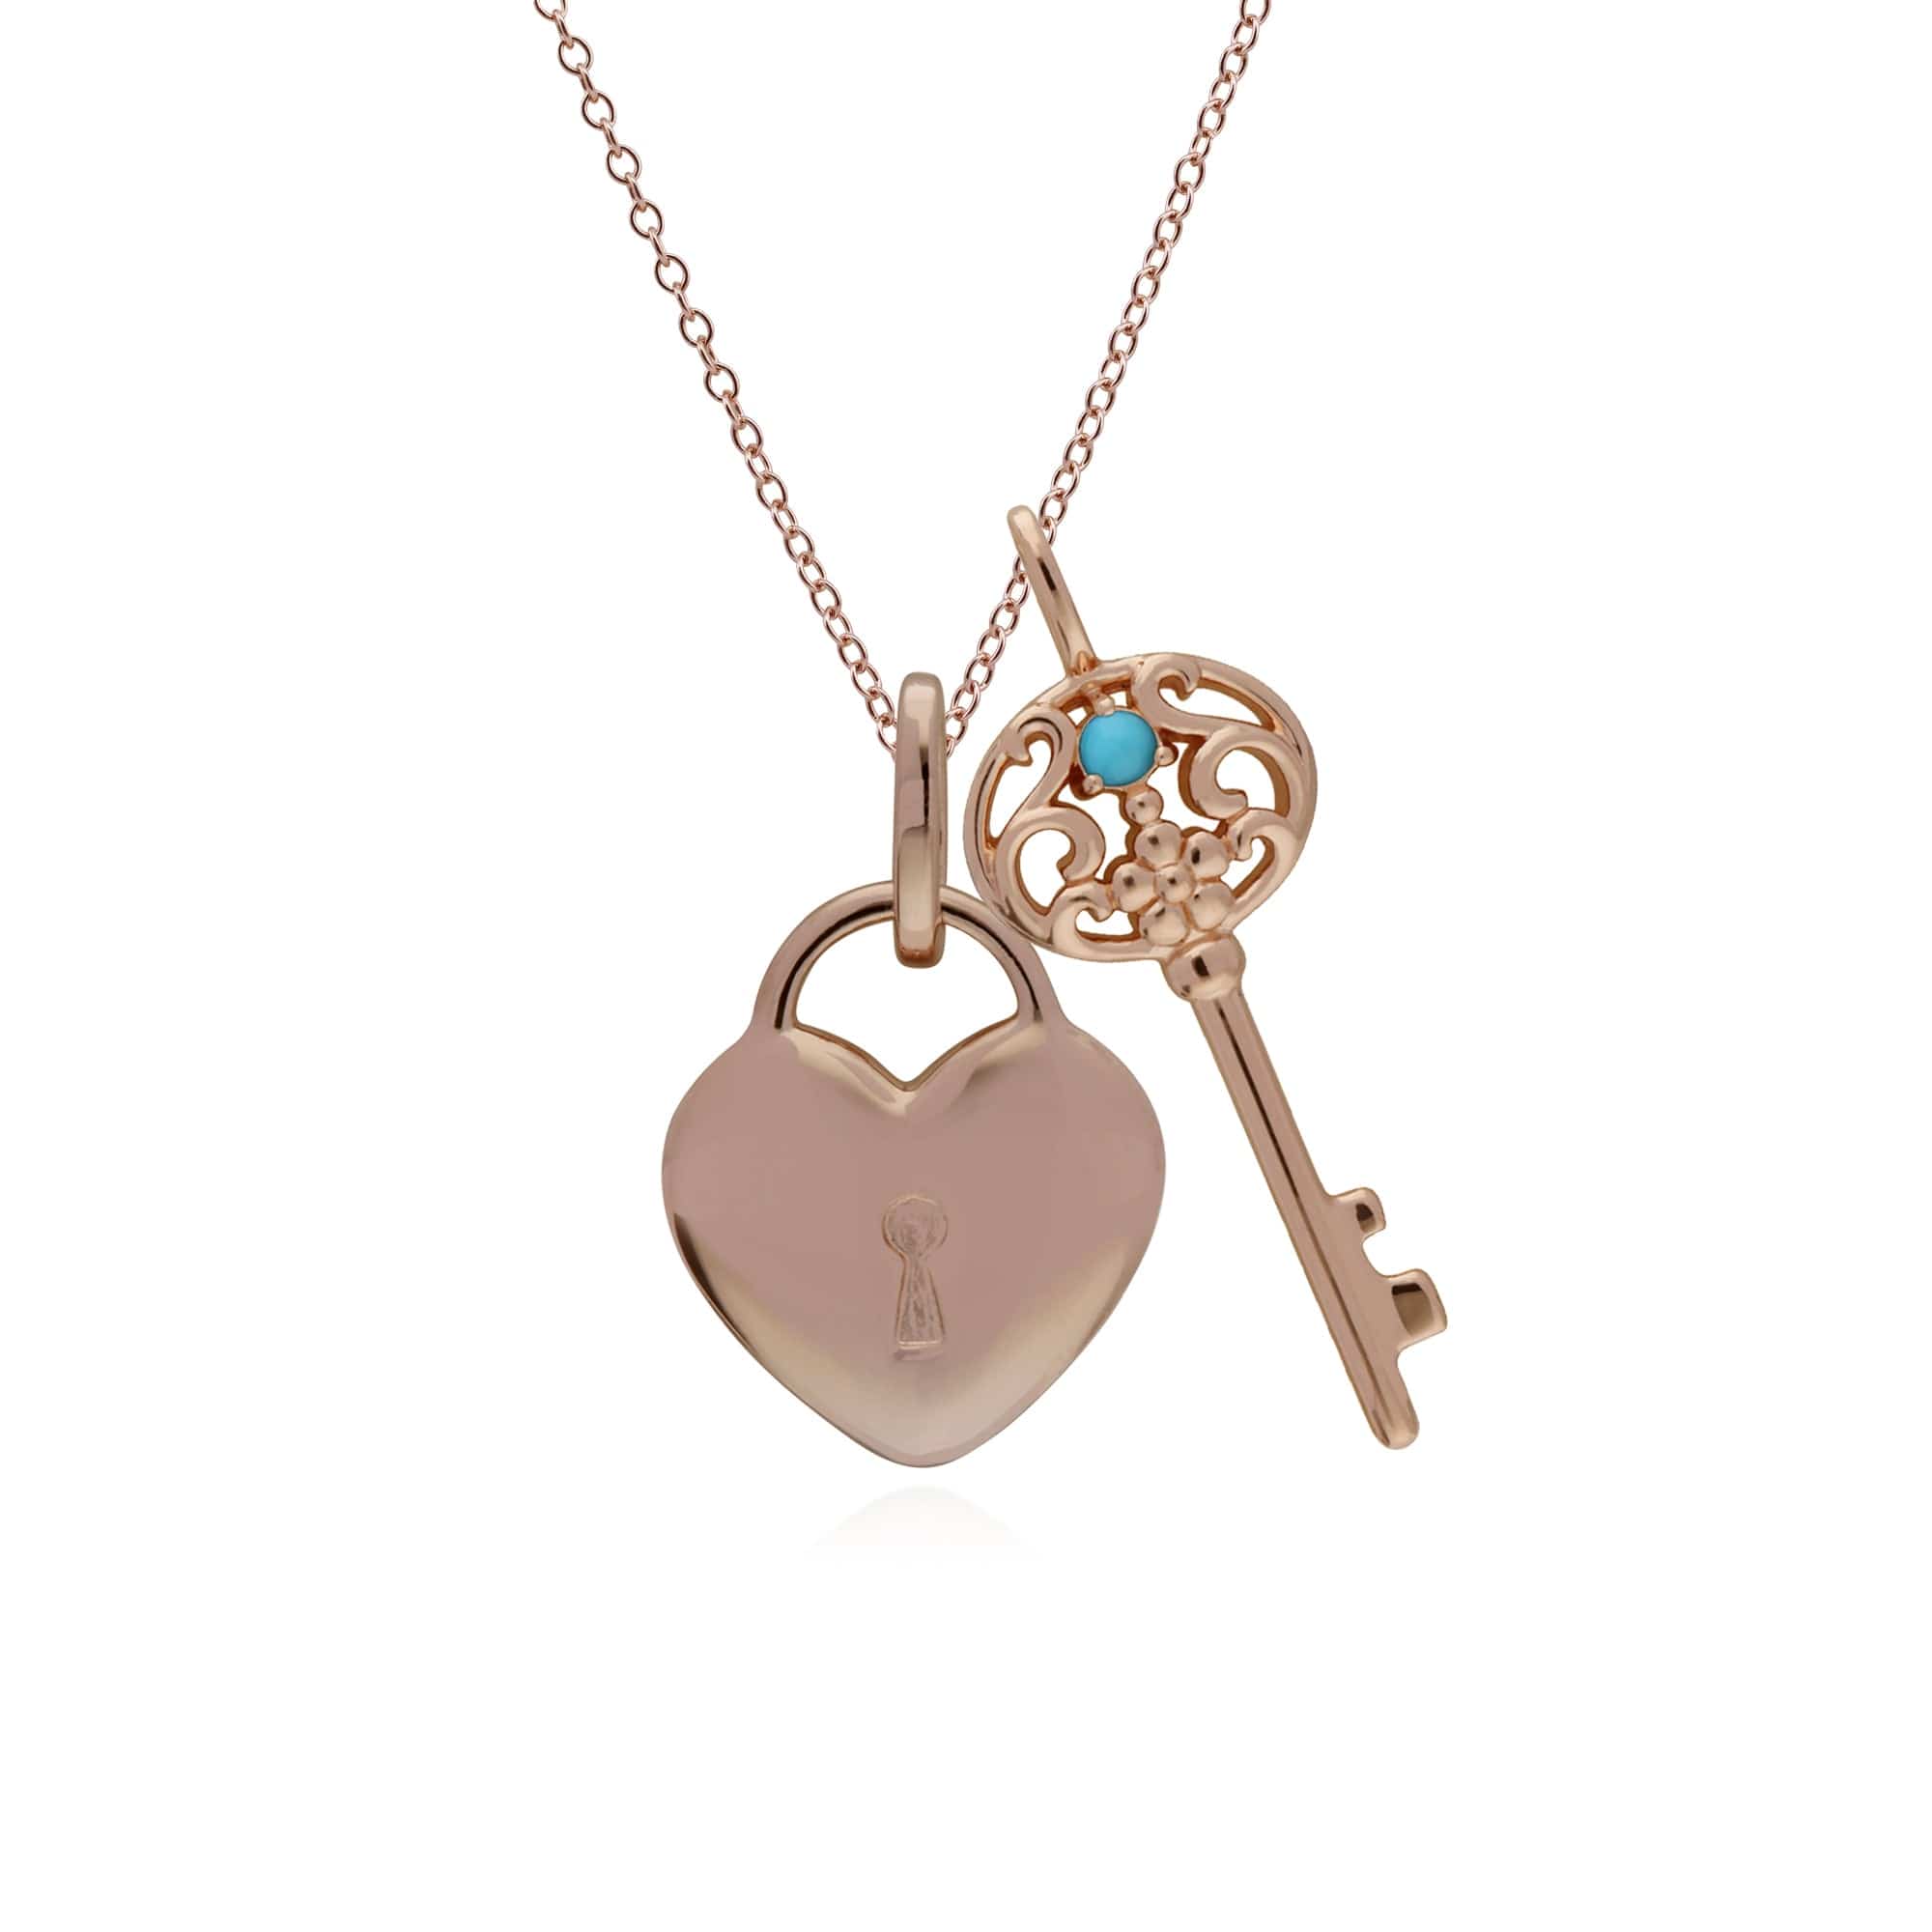 270P026714925-270P026901925 Classic Heart Lock Pendant & Turquoise Big Key Charm in Rose Gold Plated 925 Sterling Silver 1